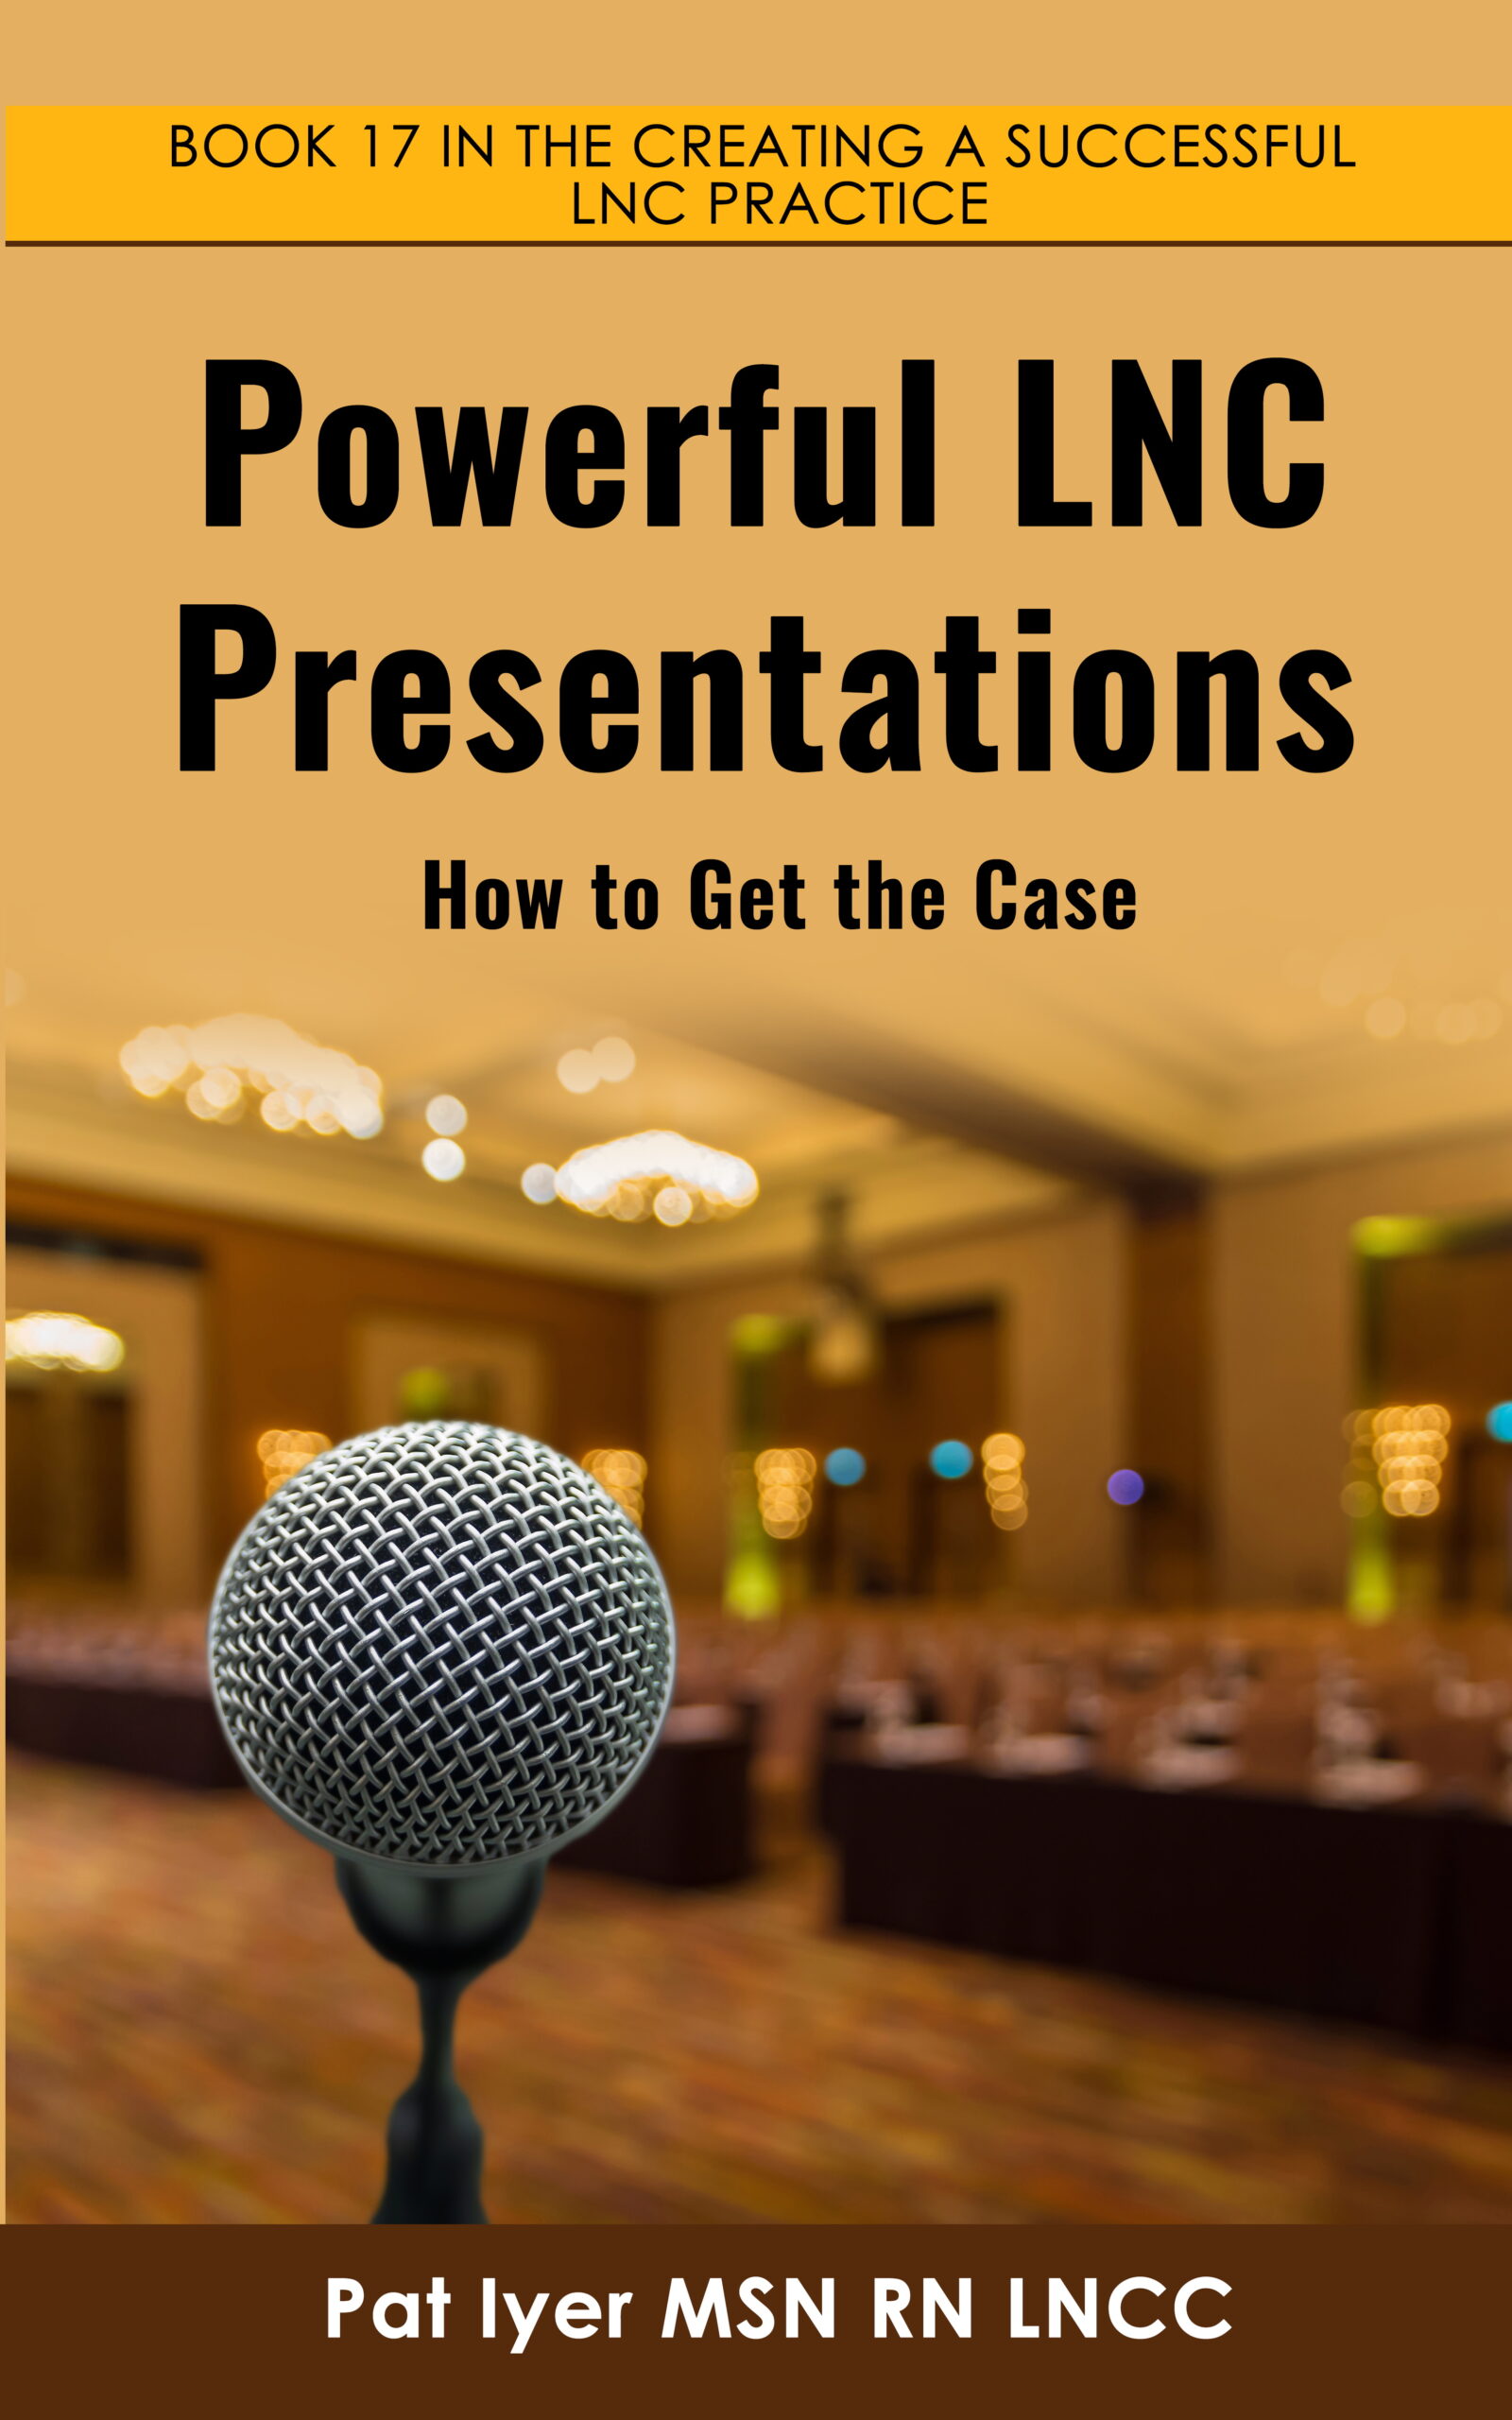 Powerful LNC Presentations book cover